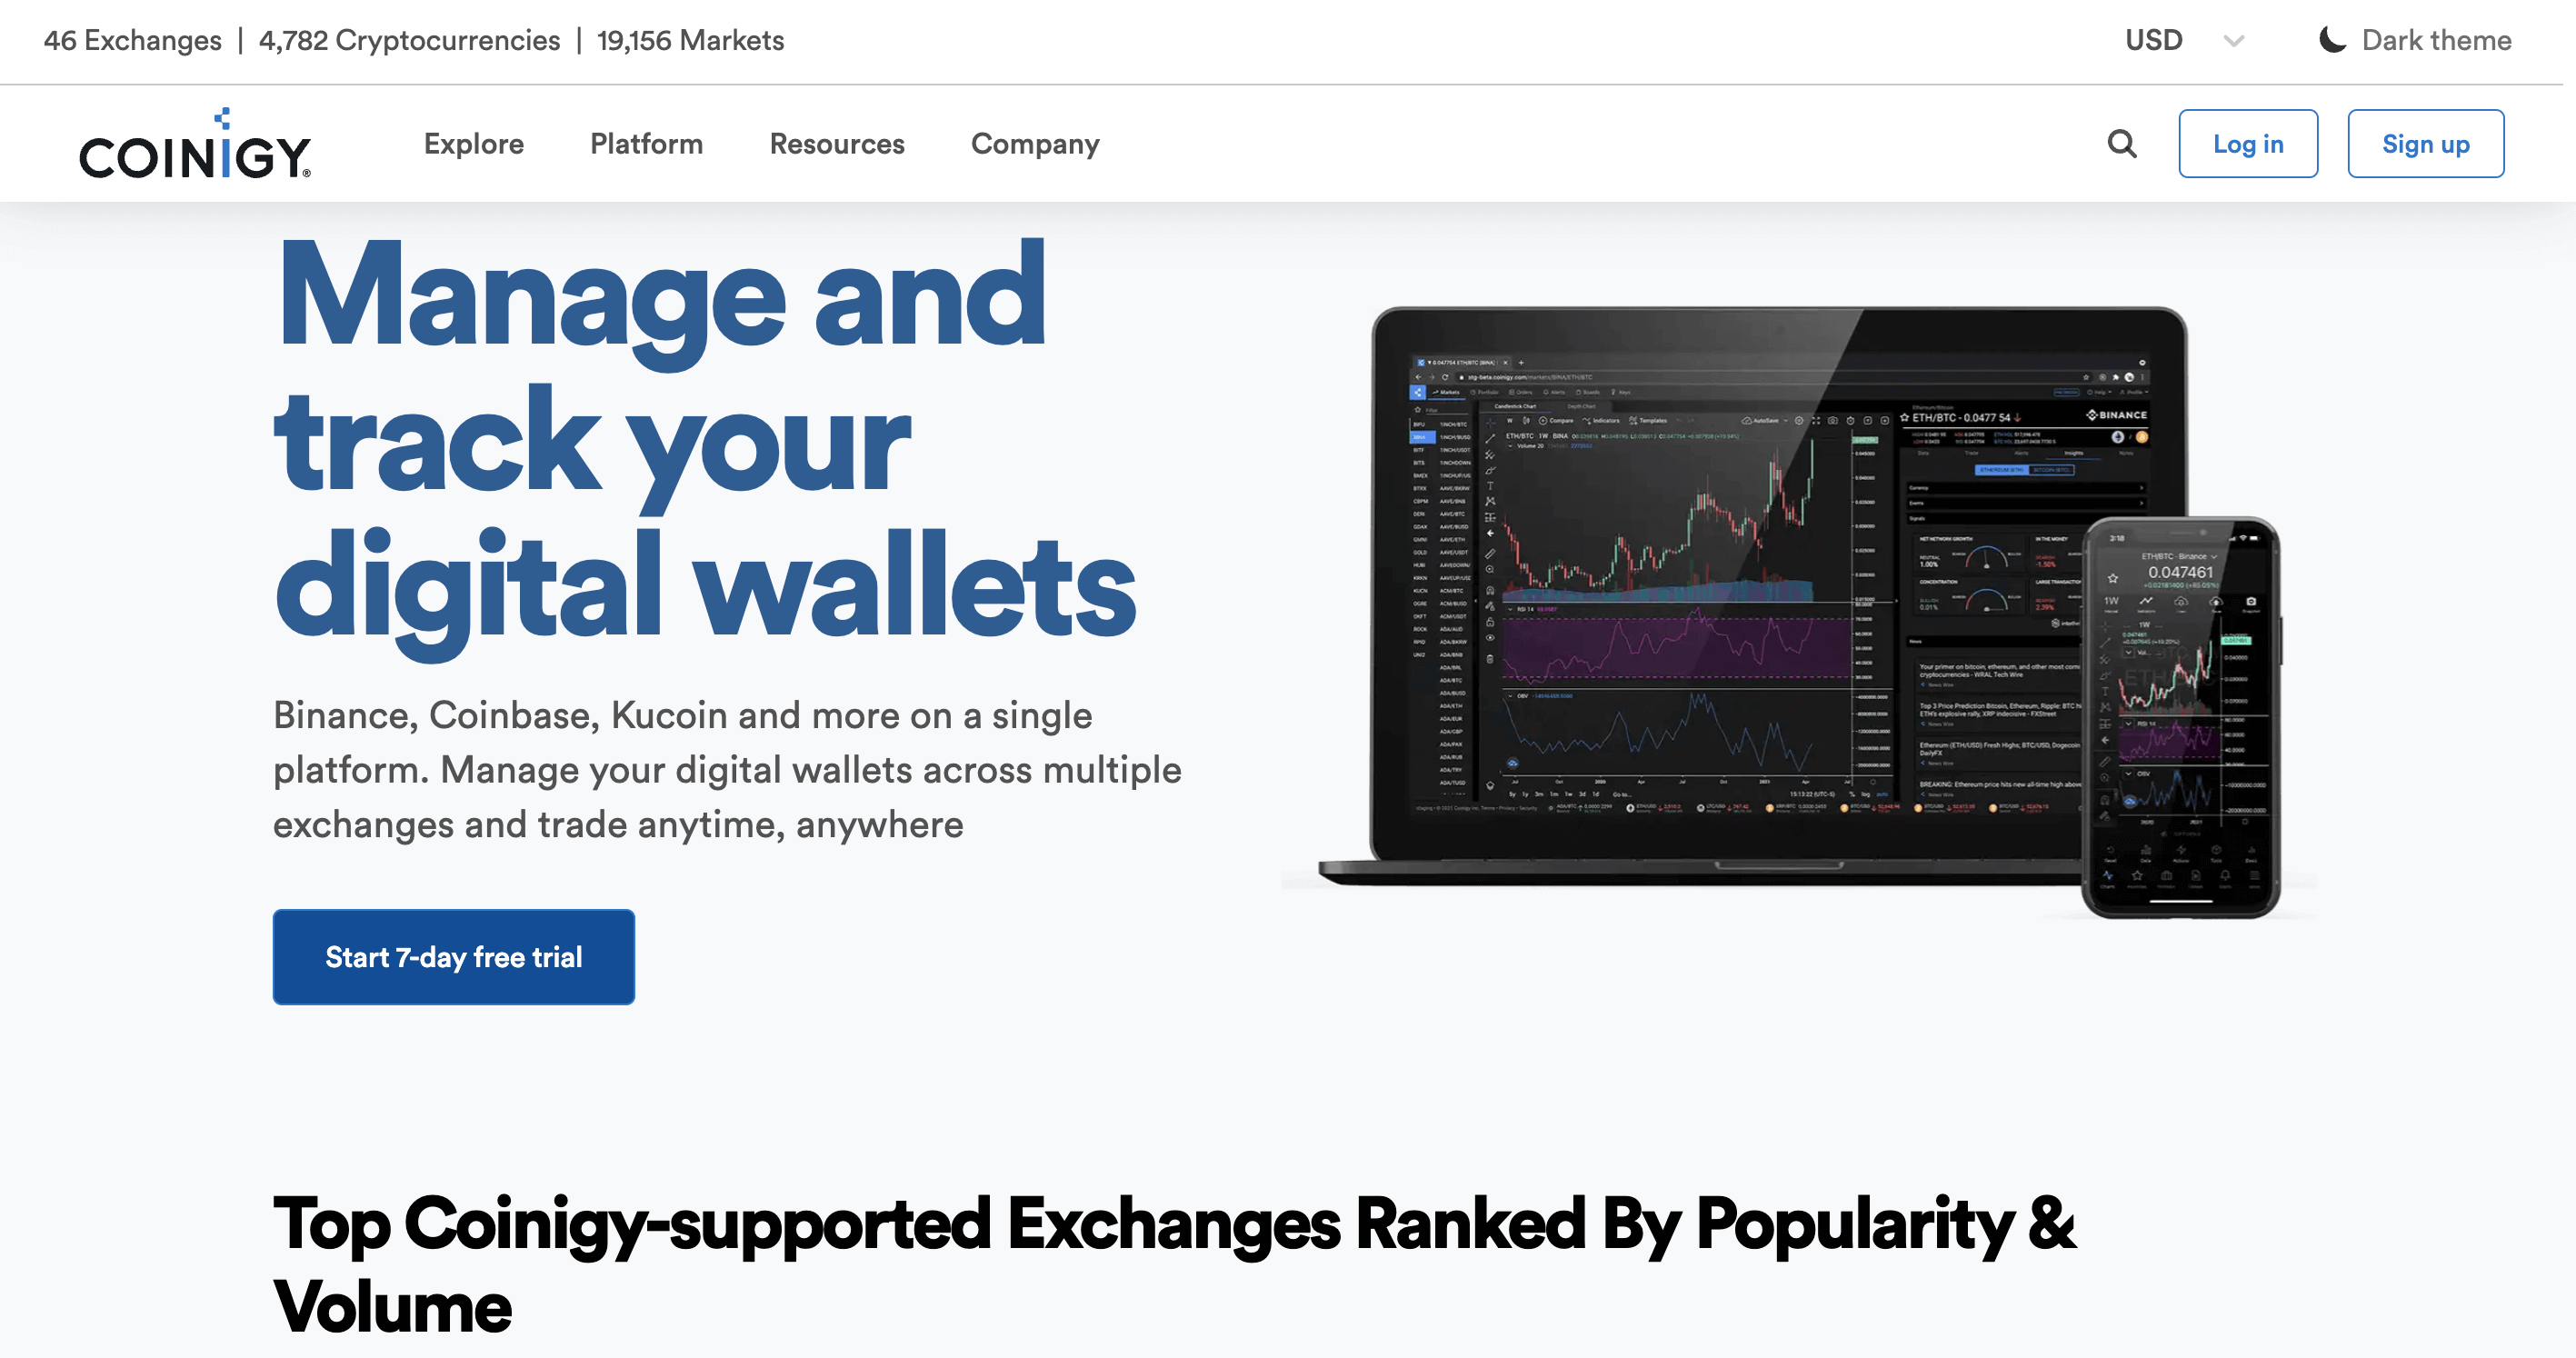 7. The Most Used Trading Platform: Coinigy